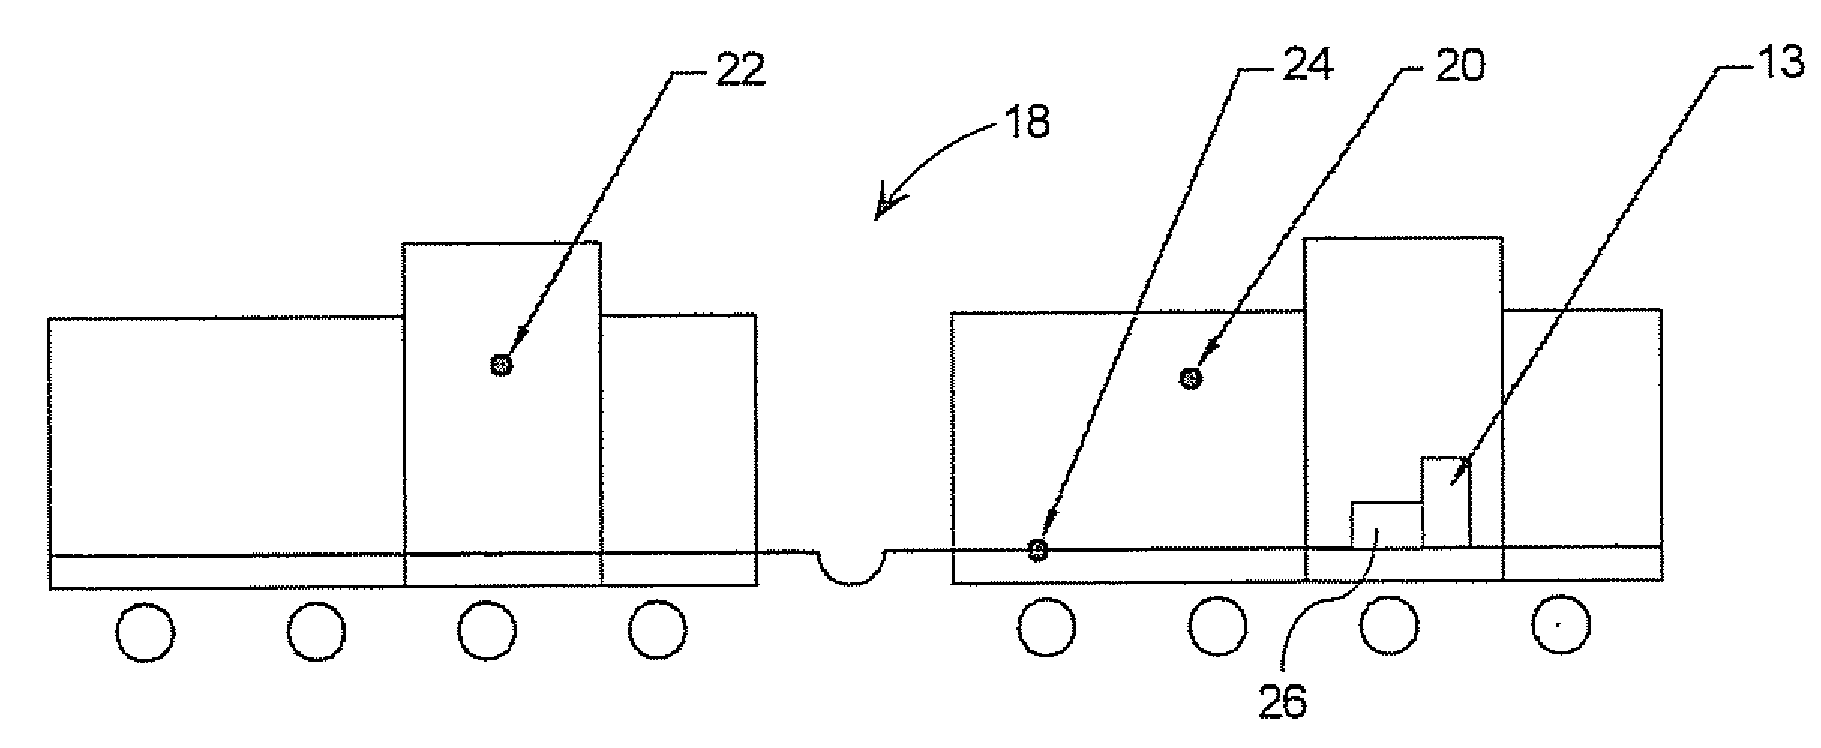 System and method for controlling horsepower in a locomotive consist